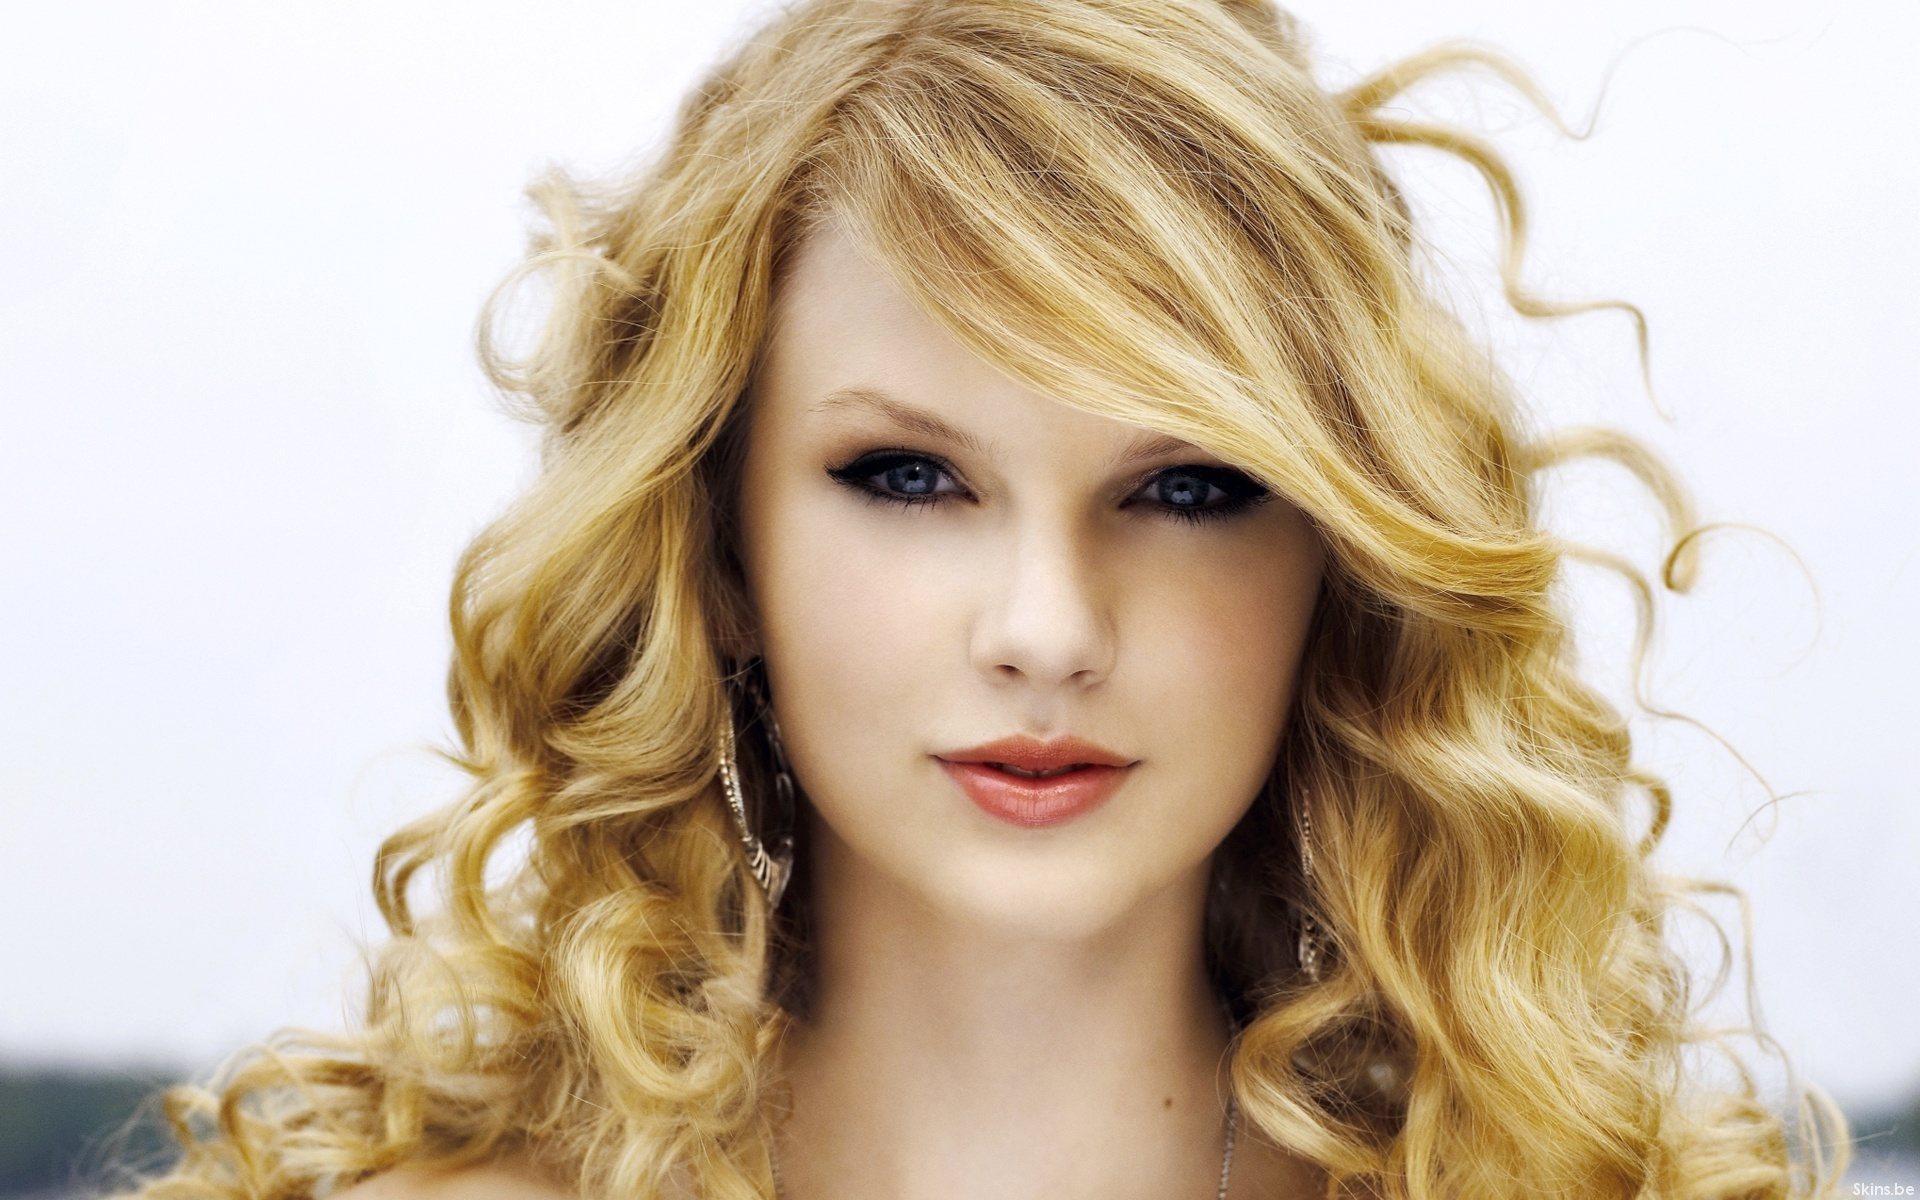 2013-Taylor-Swift-Blonde-Hair | wallpapers55.com - Best Wallpapers ...